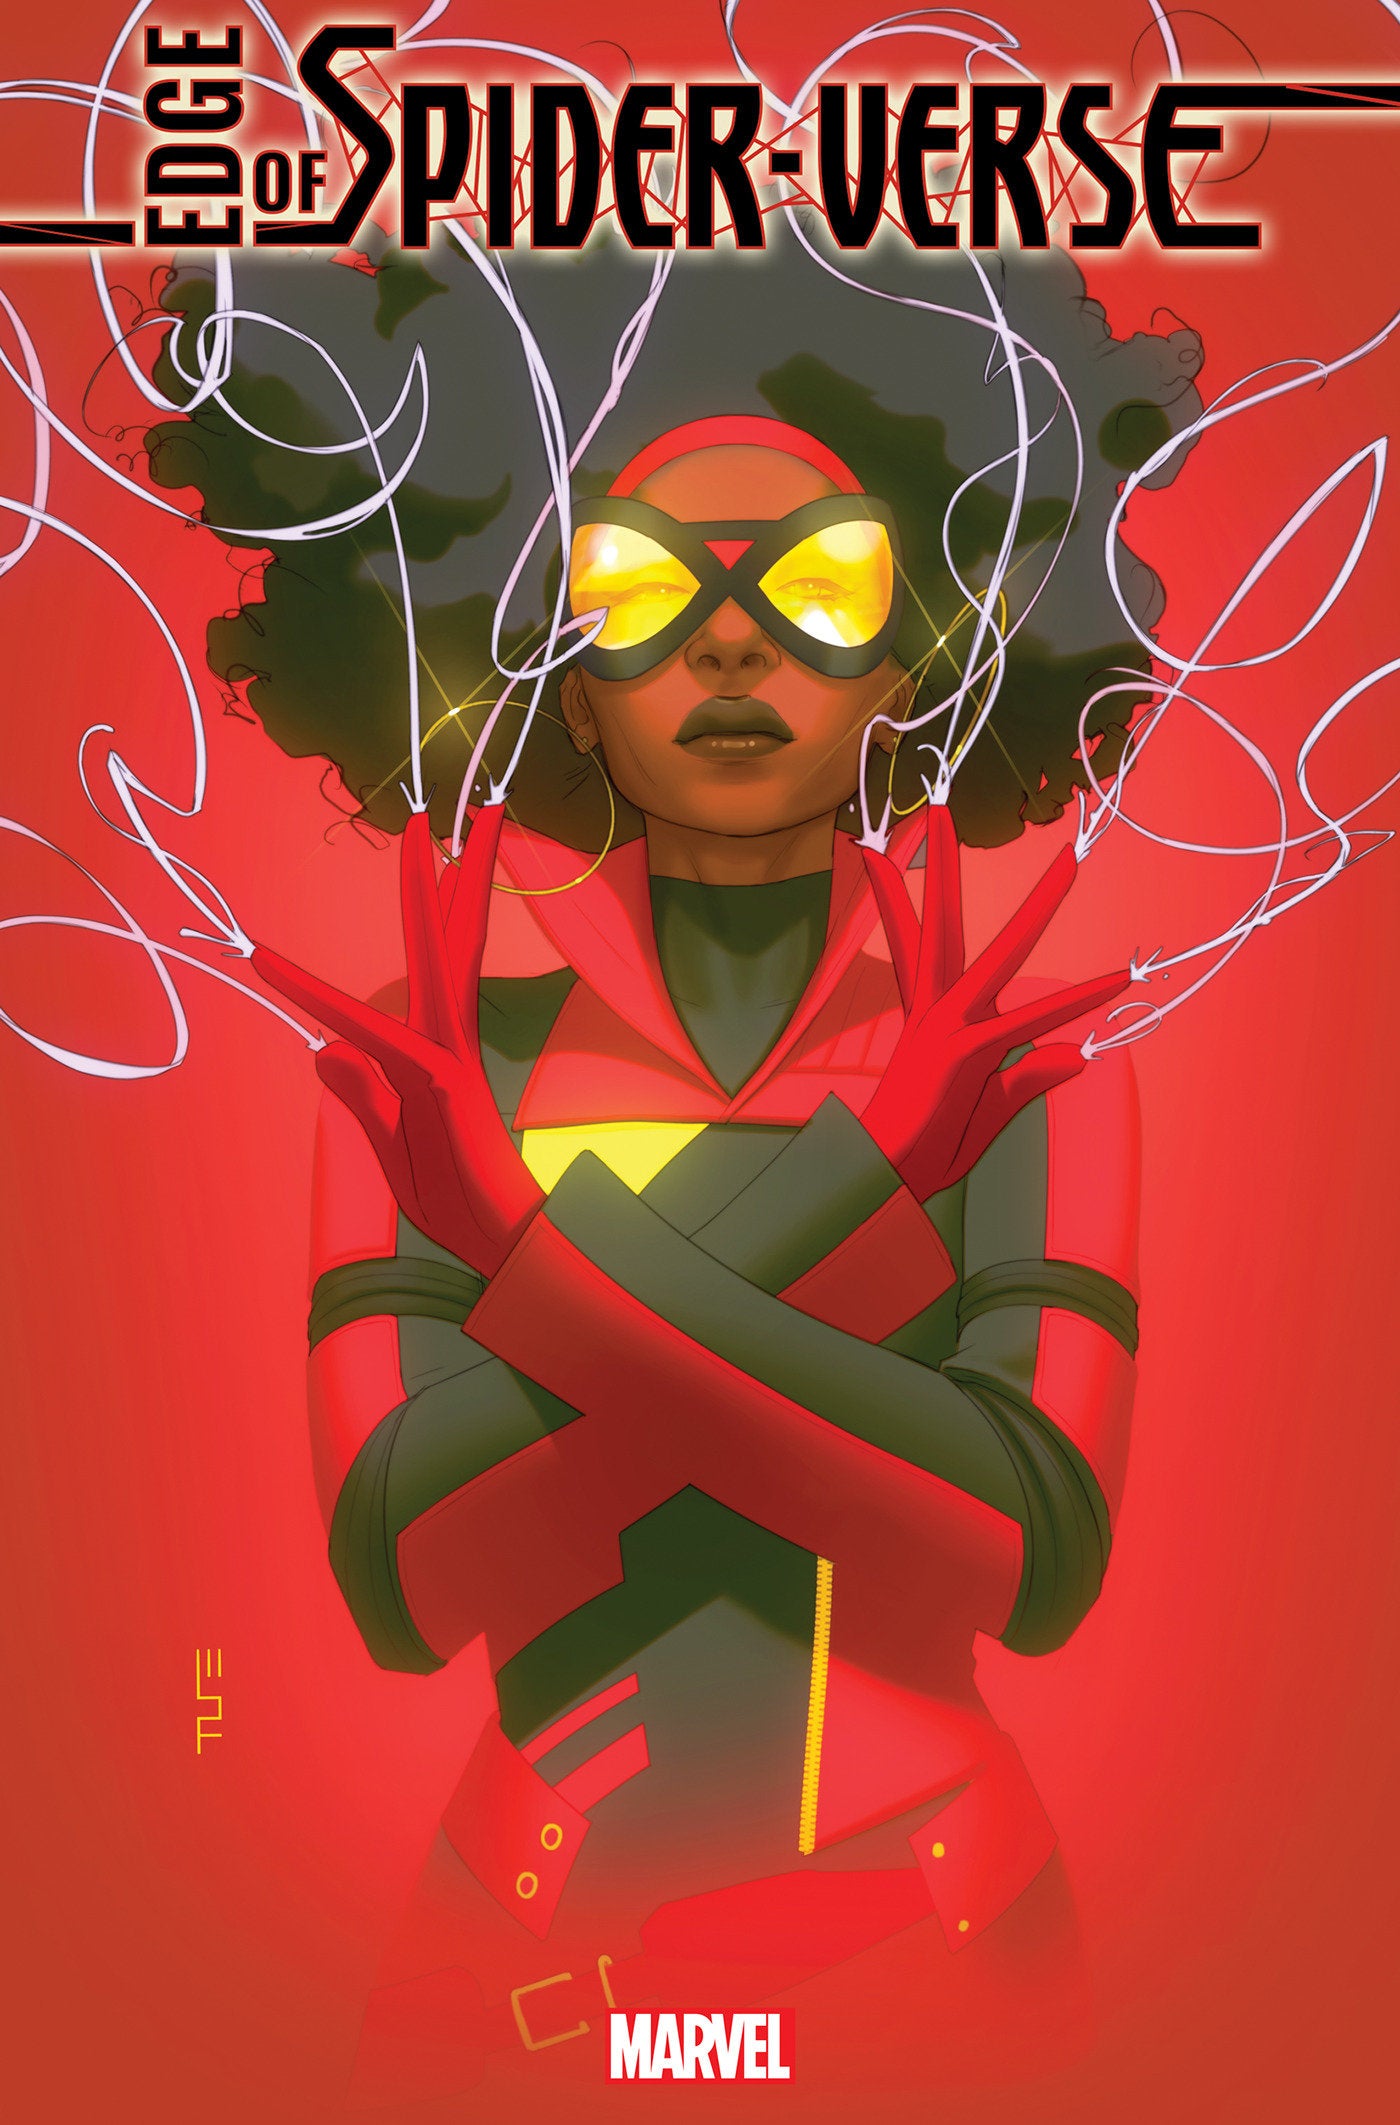 Edge Of Spider-Verse #4 W. Scott Forbes Spider-Woman Variant | L.A. Mood Comics and Games